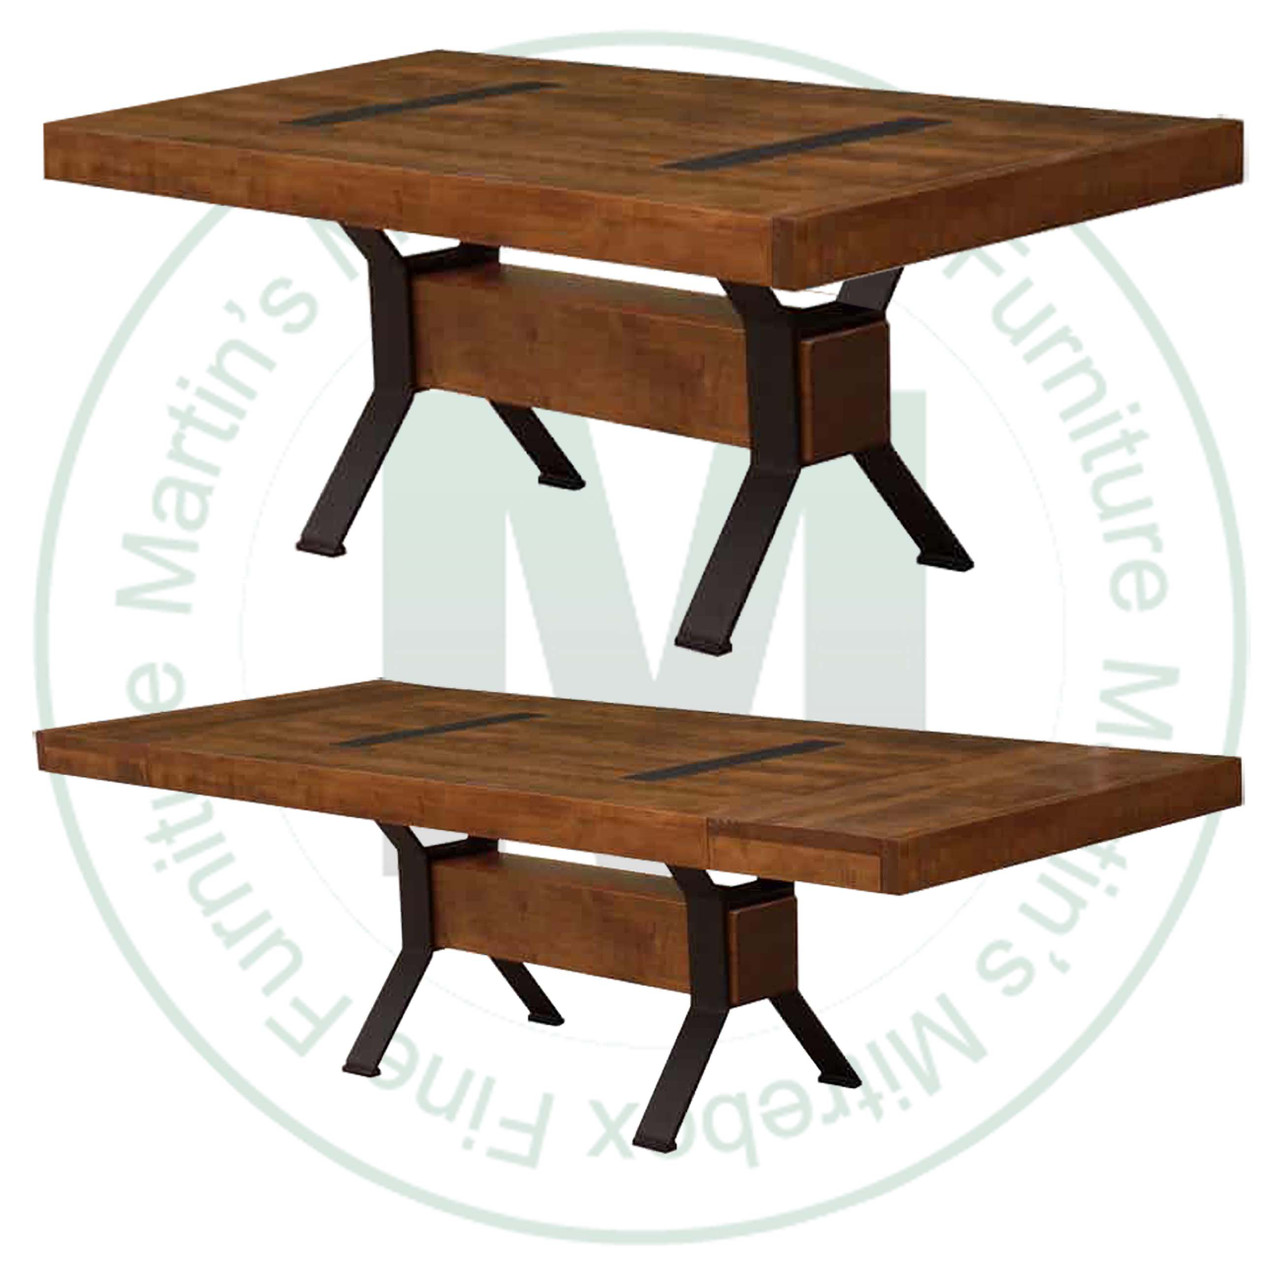 Pine Millwright Solid Top Pedestal Table With 2 - 16'' End Leaves 36'' Deep x 60'' Wide x 30'' High